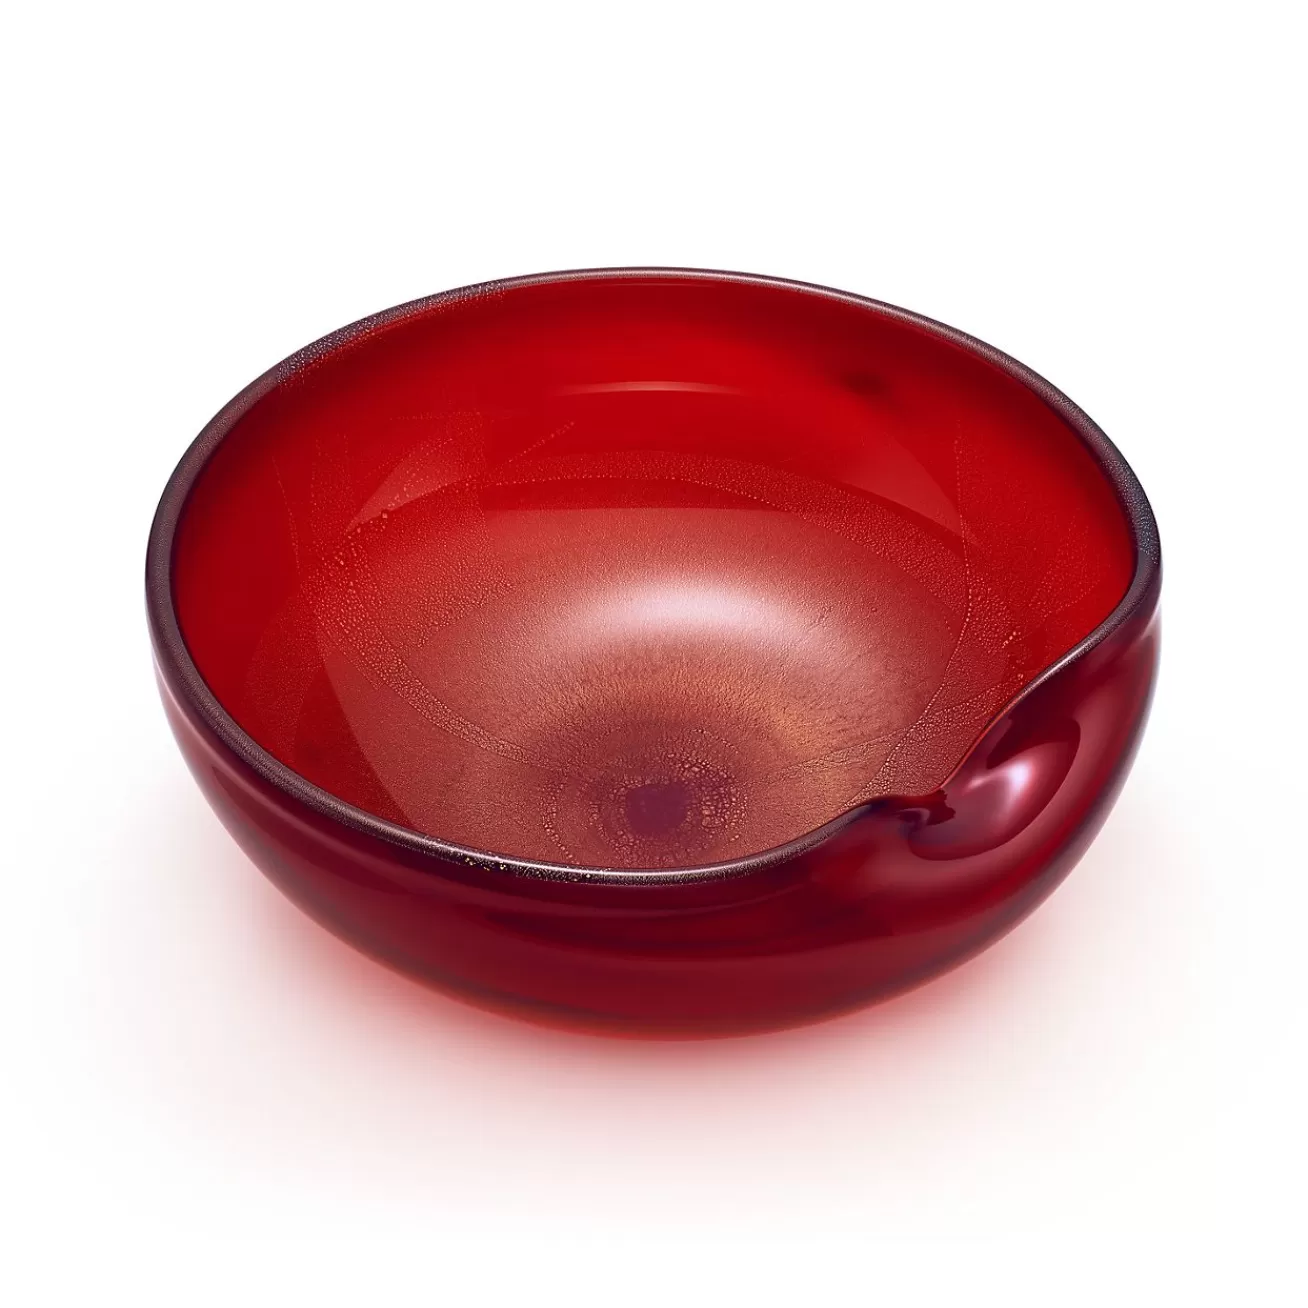 Tiffany & Co. Elsa Peretti® Thumbprint bowl in red Venetian glass. More sizes available. | ^ The Home | Housewarming Gifts